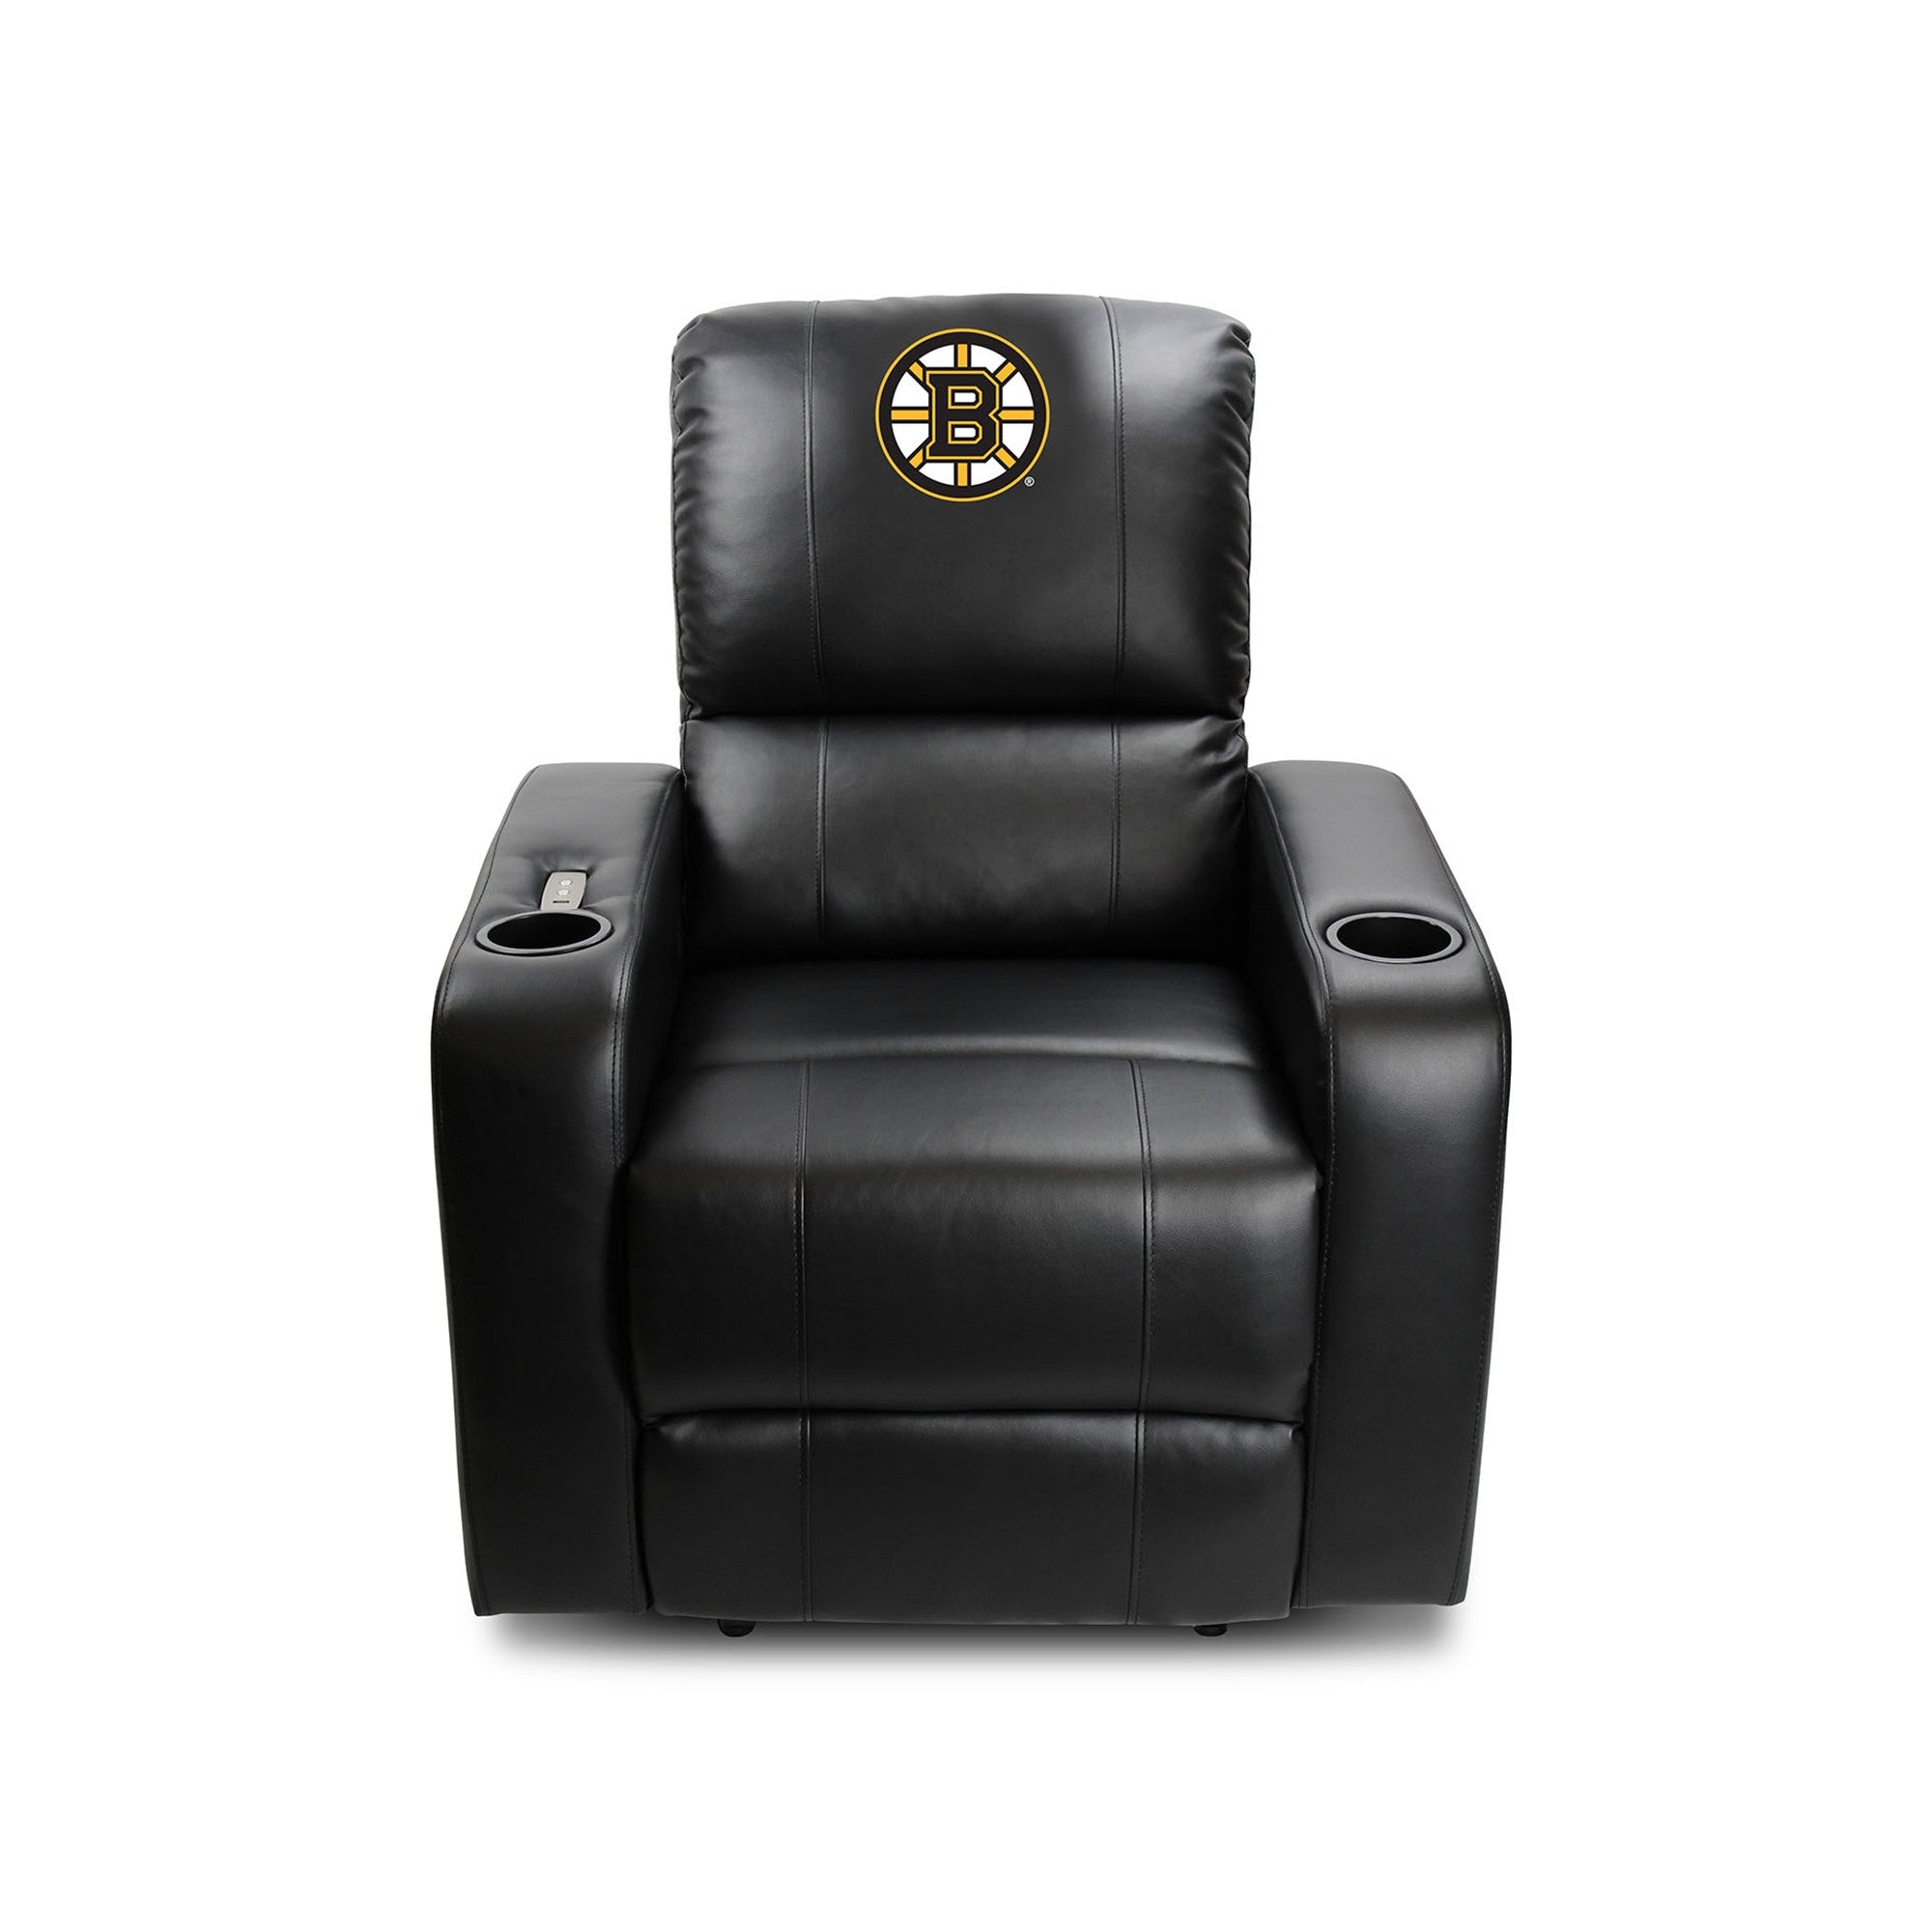 Picture of Imperial Boston Bruins Power Theater Recliner With USB Port